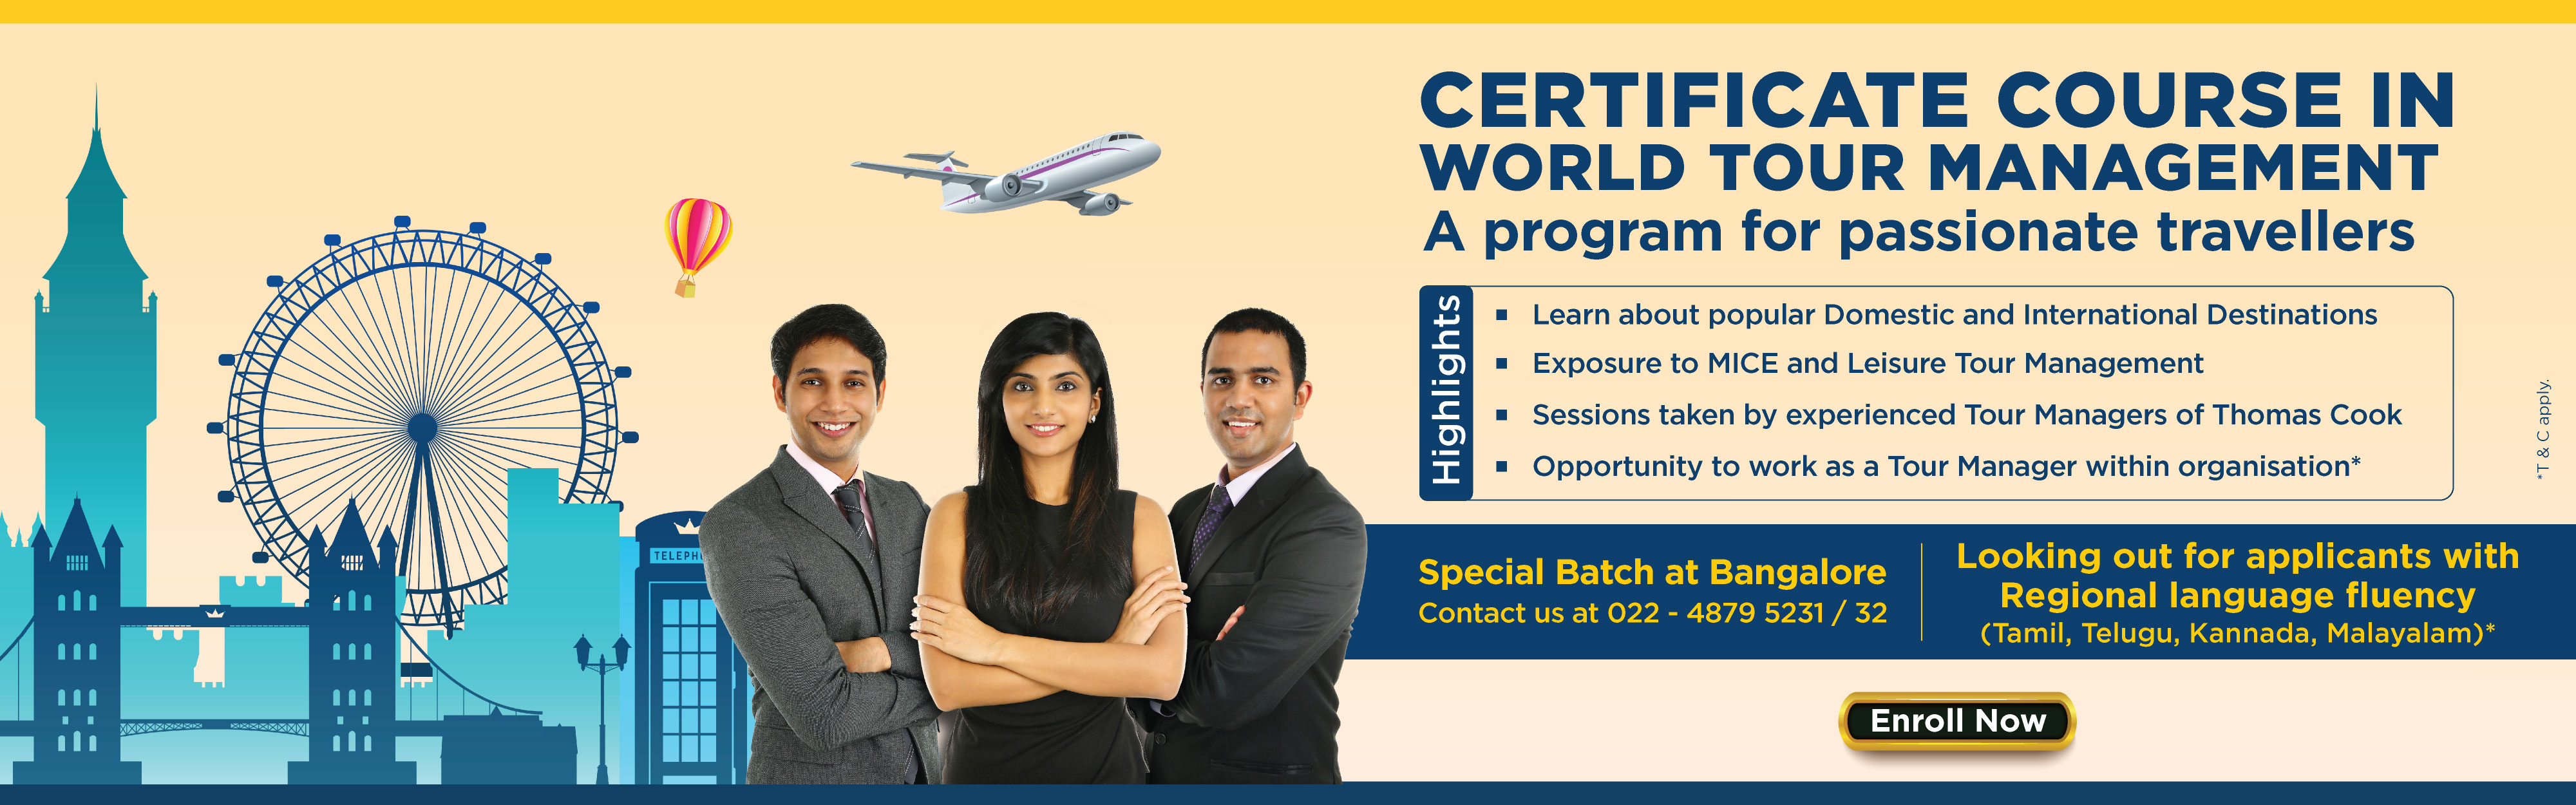 Certificate course in World tour management